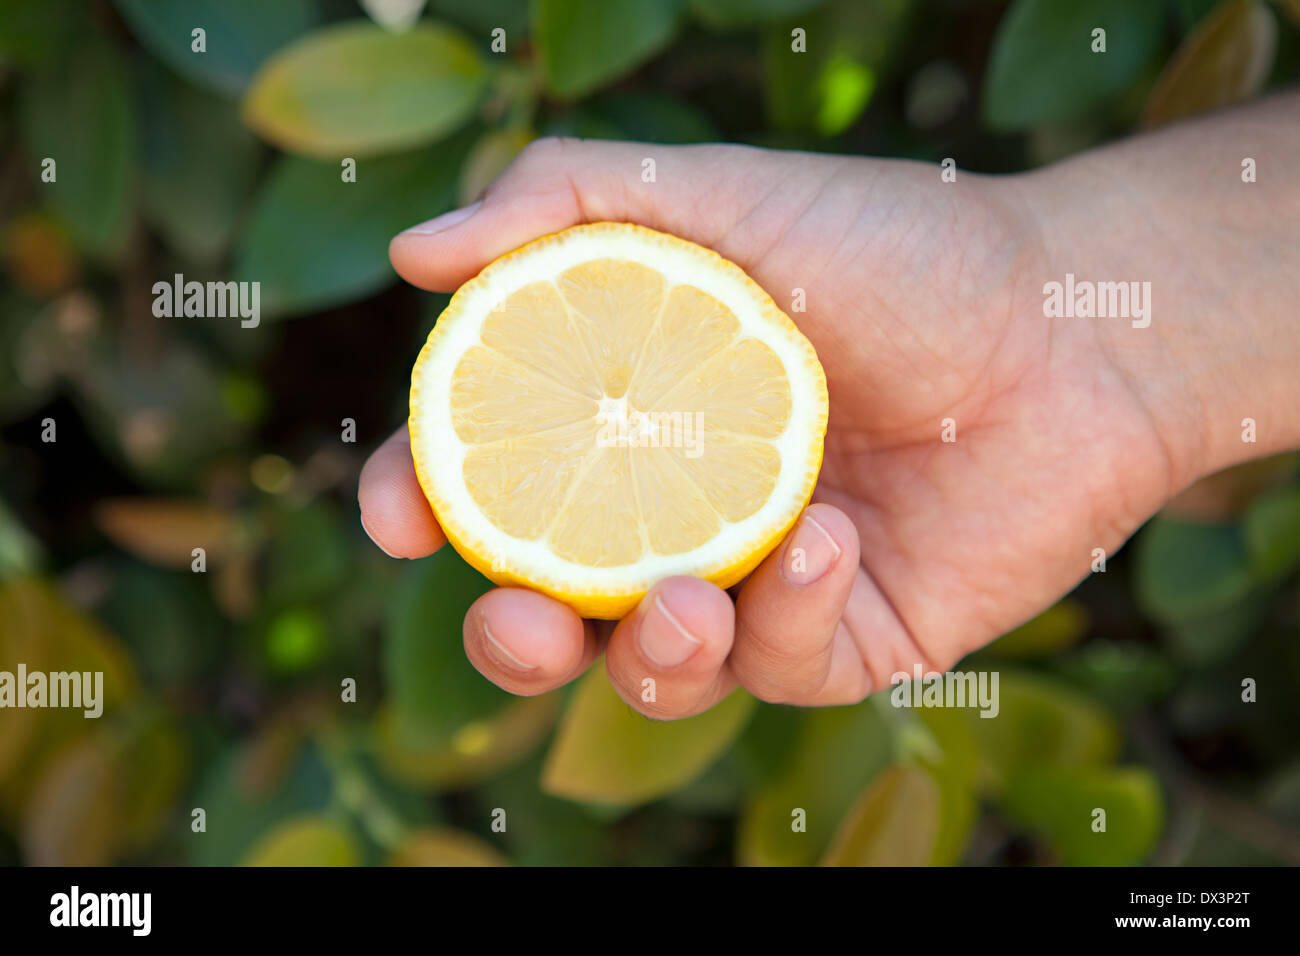 Man's hand holding cross-section of yellow lemon, close up, high angle view Stock Photo